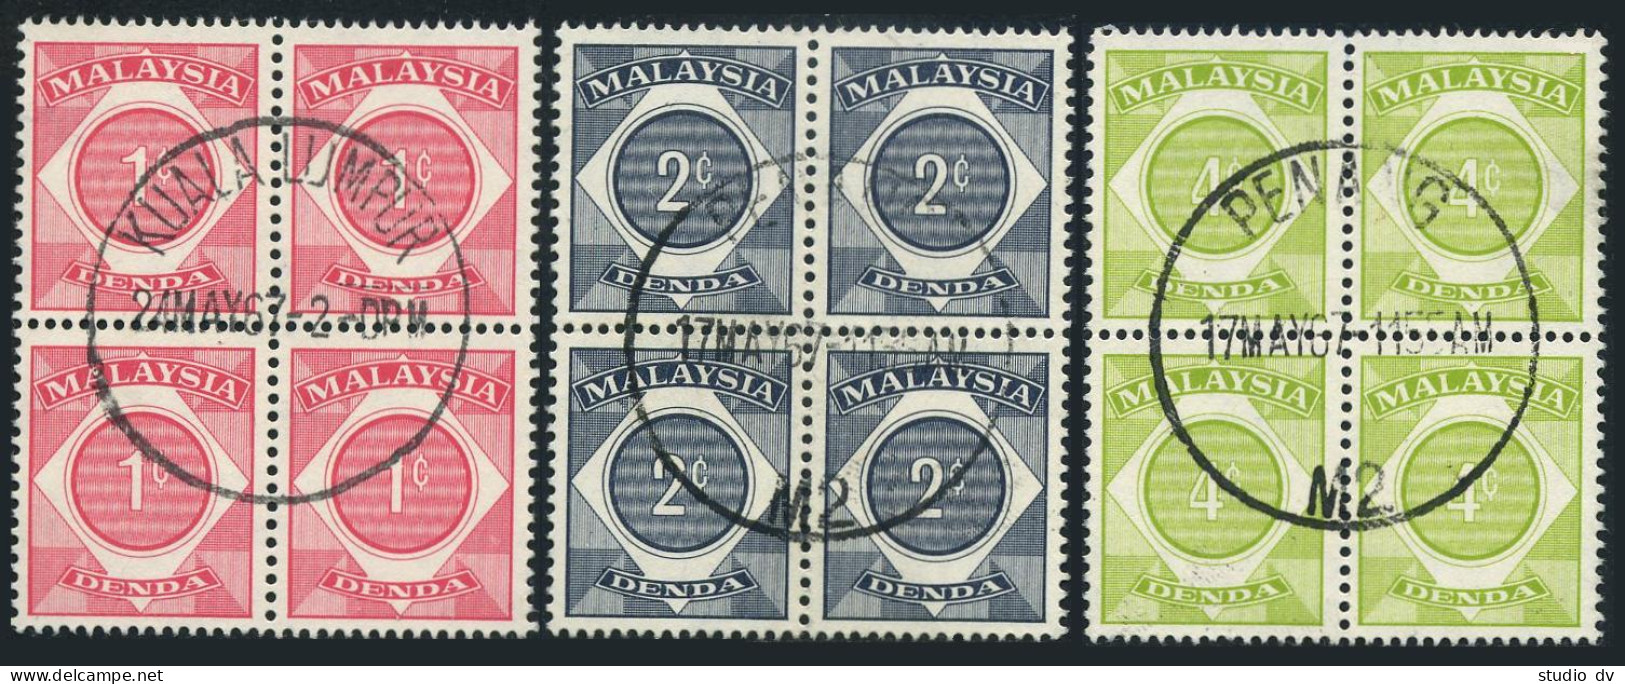 Malaysia J1-J3 Blocks/4,CTO.Michel P8-P10. Postage Due Stamps,1966.Numeral. - Malaysia (1964-...)